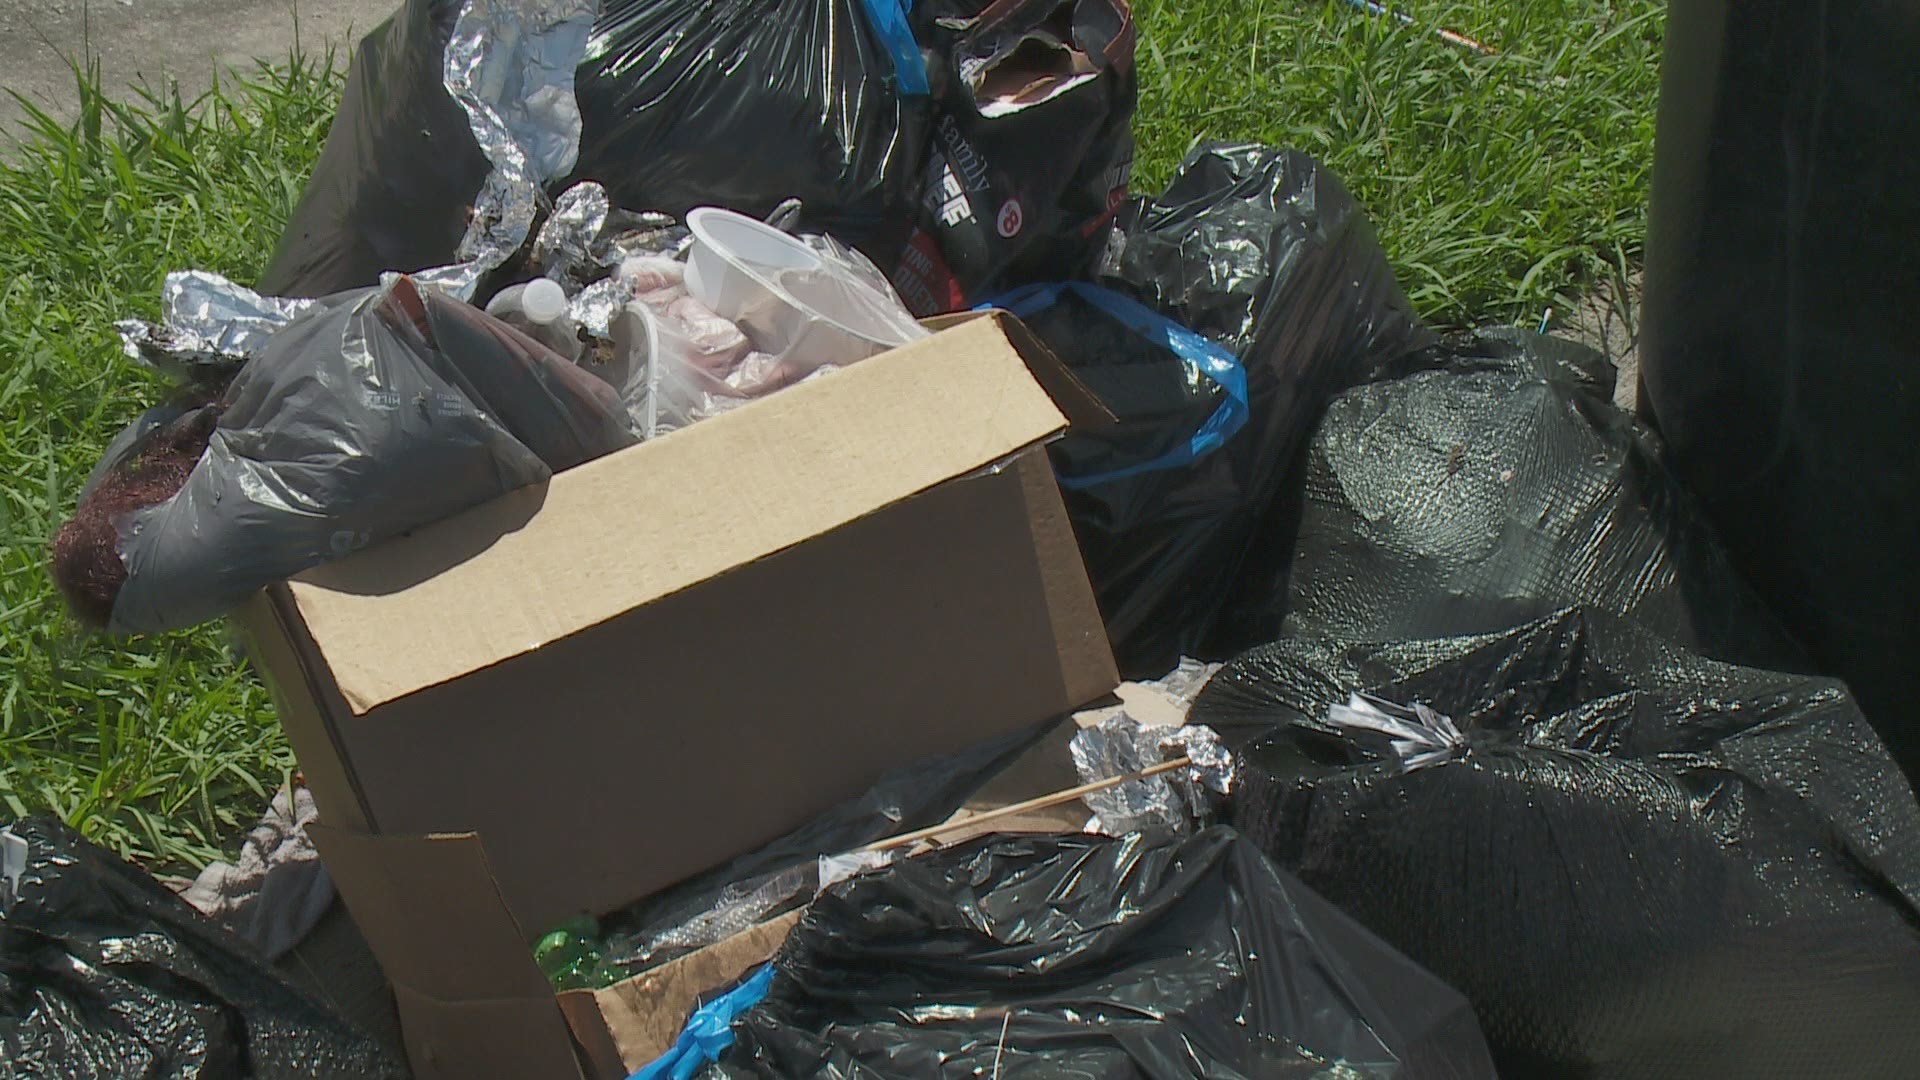 Councilmember Cyndi Nguyen hopes by cutting the number of trash pickups, no neighborhoods would be missed.